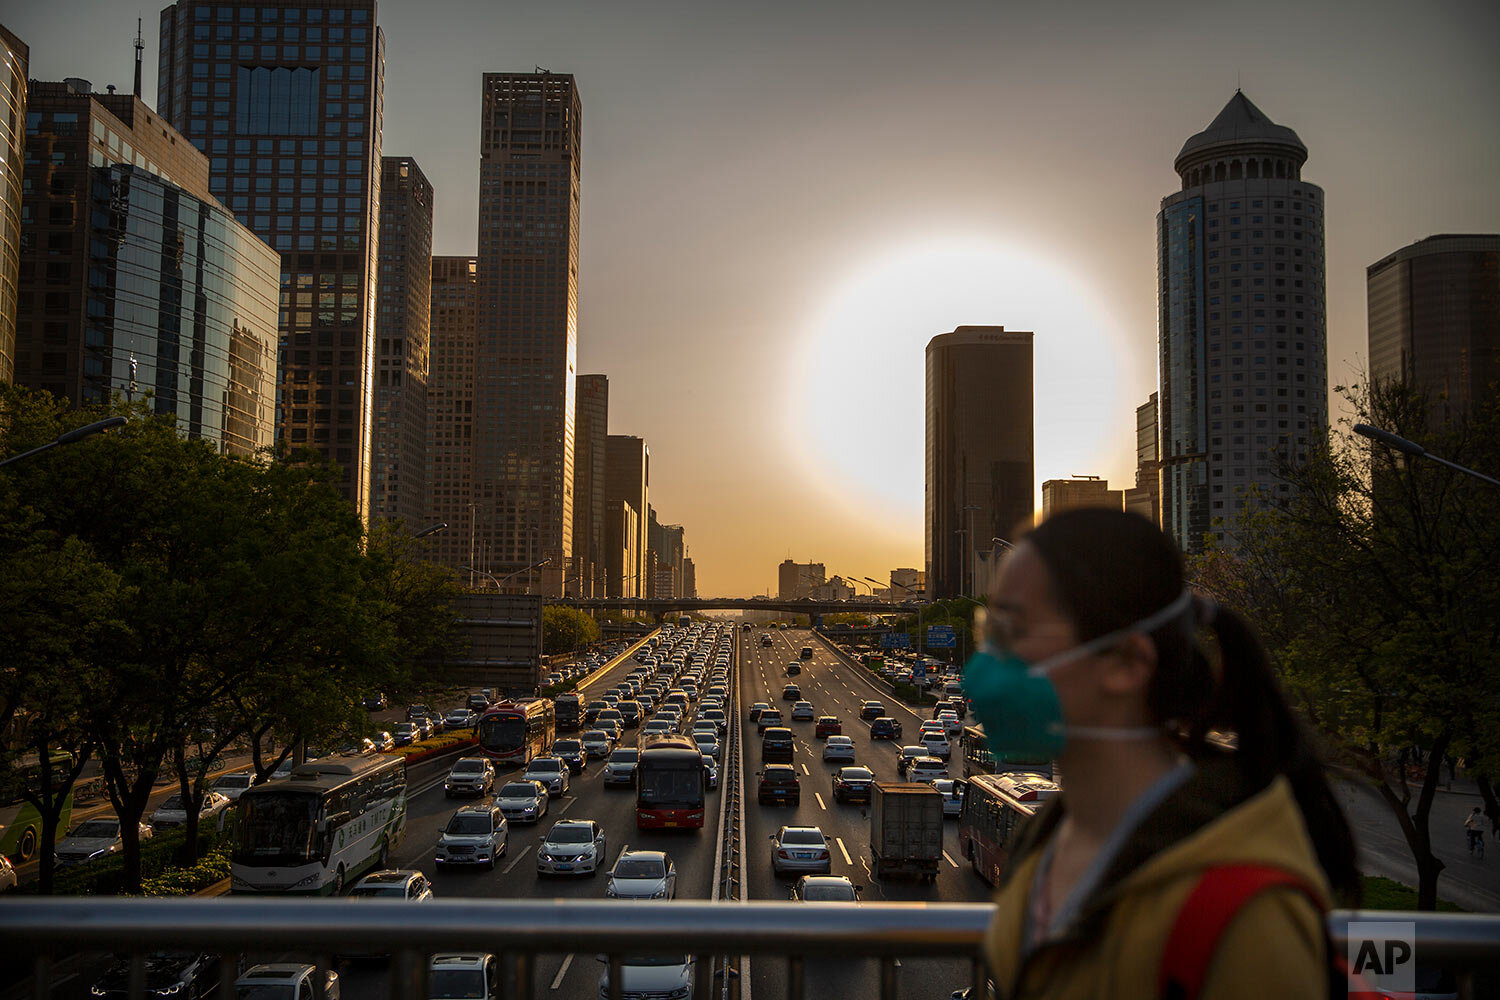  A woman wears a face mask to protect against the spread of the new coronavirus as she walks across a pedestrian bridge in Beijing, Thursday, April 23, 2020. (AP Photo/Mark Schiefelbein) 